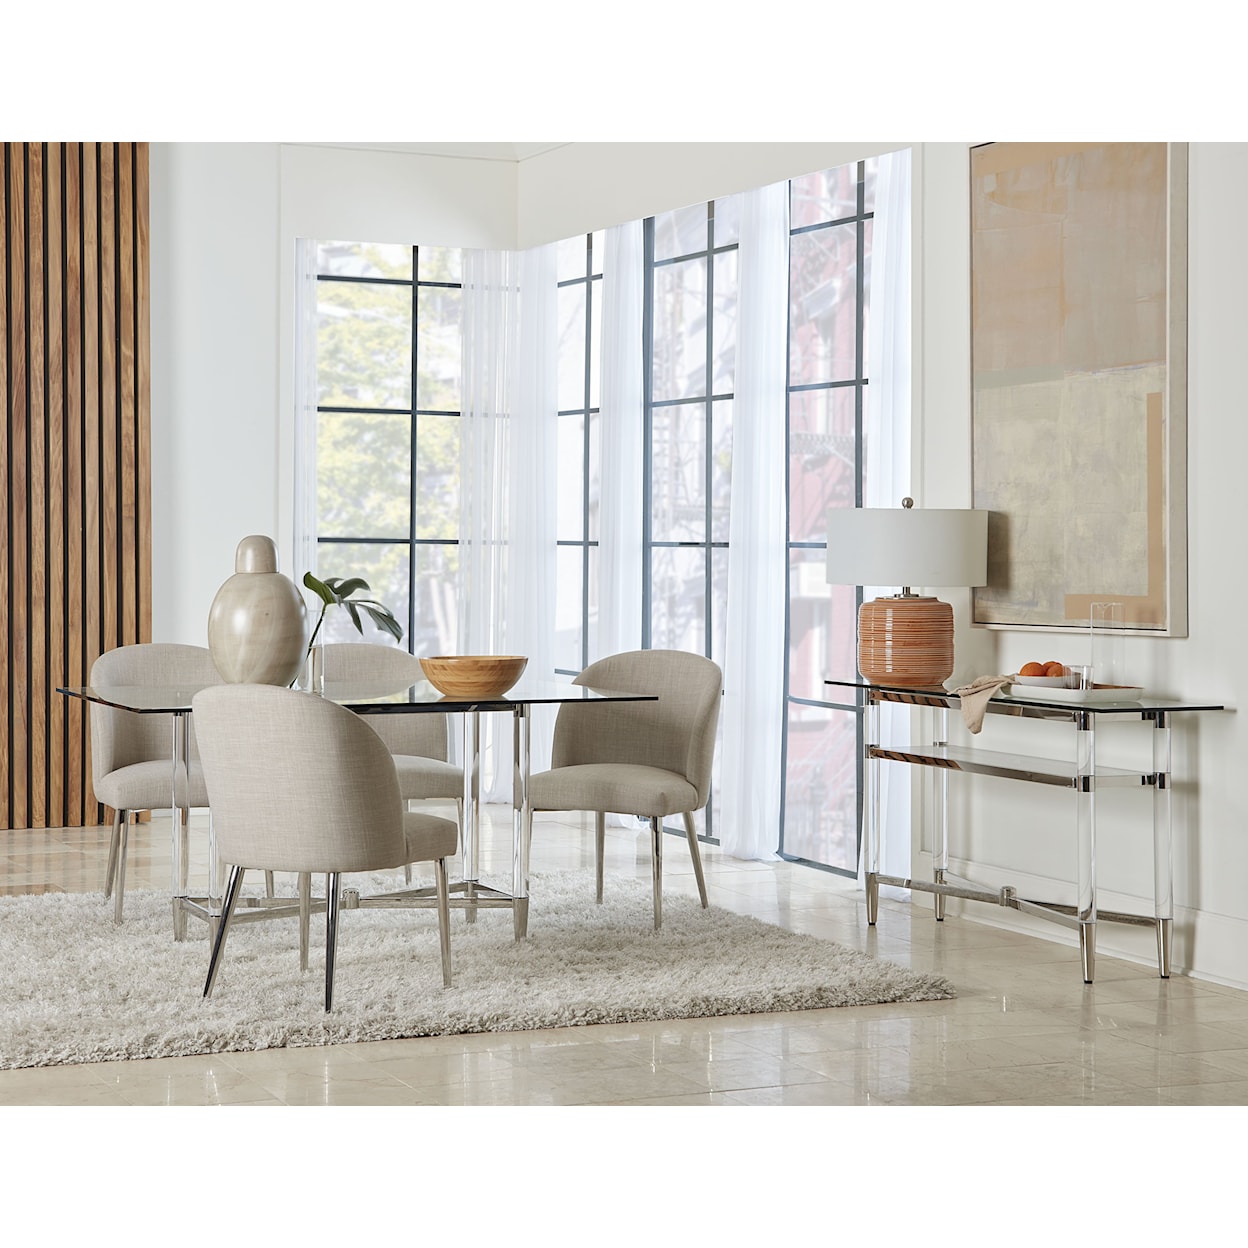 Modus International Marilyn Upholstered Dining Chair